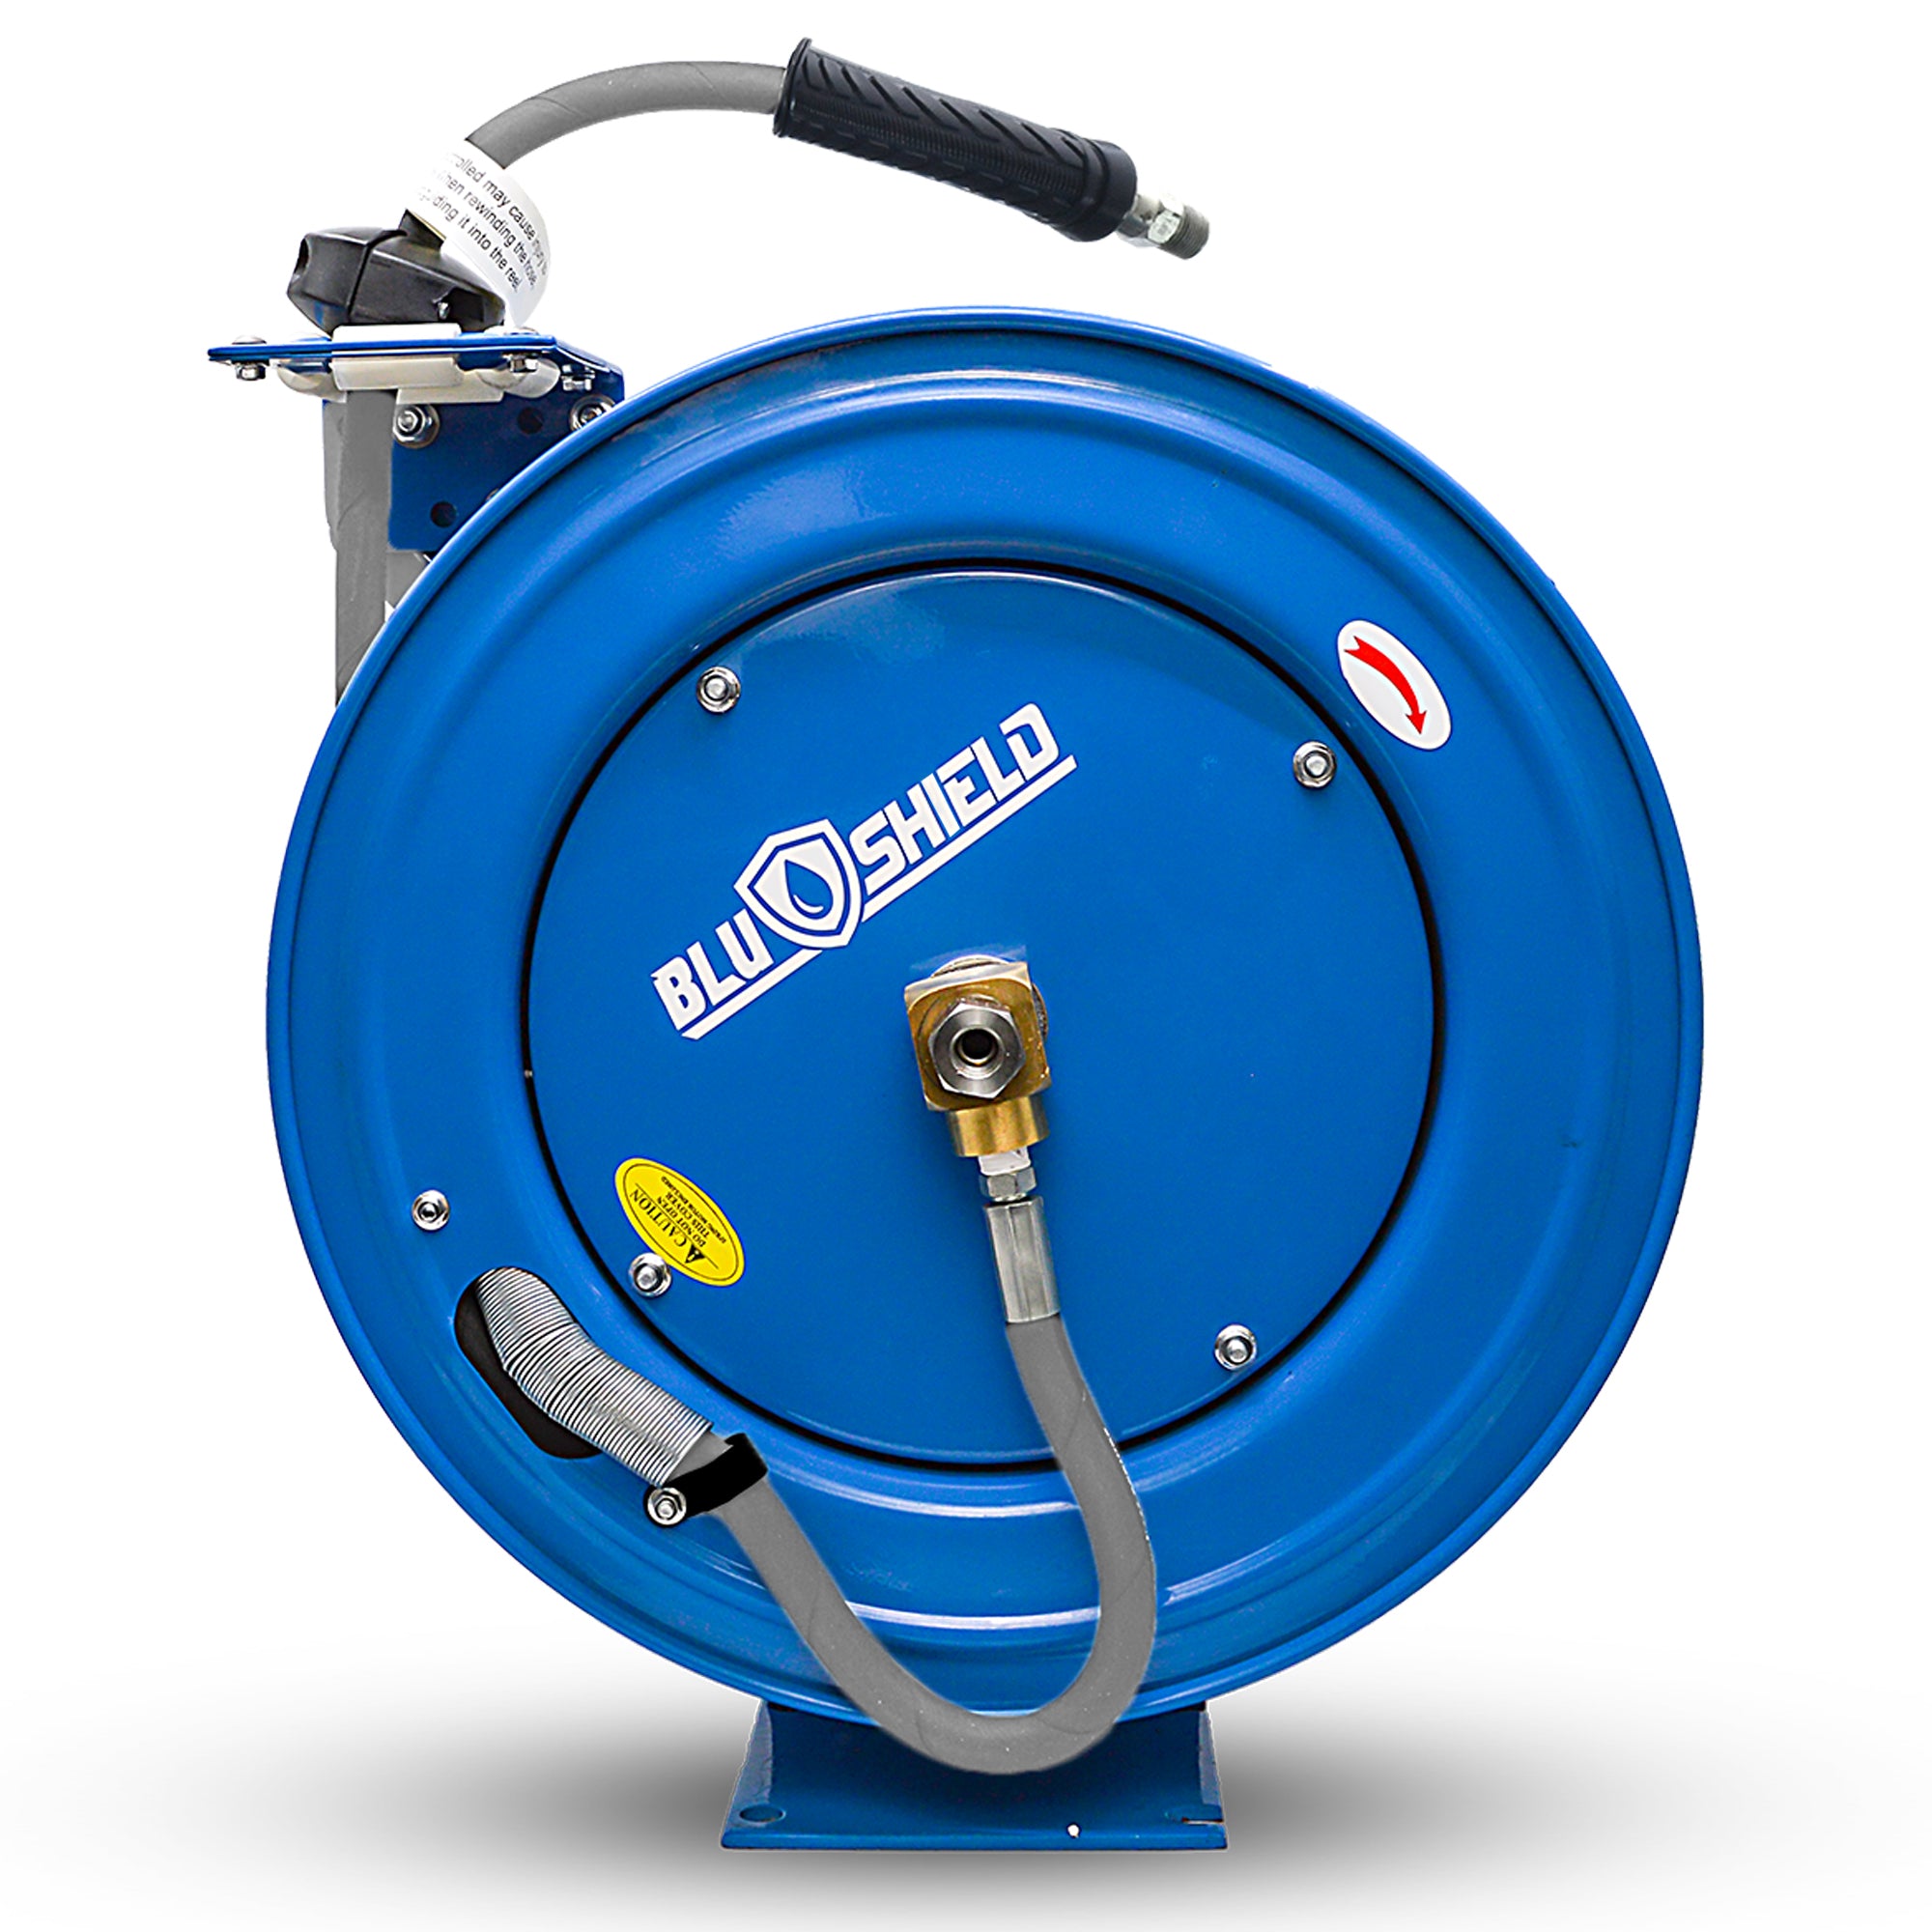 BluShield 1/4" Pressure Washer Retractable Hose Reel with Polyester Braided Hose, 6' Lead-in Hose, Non Marking